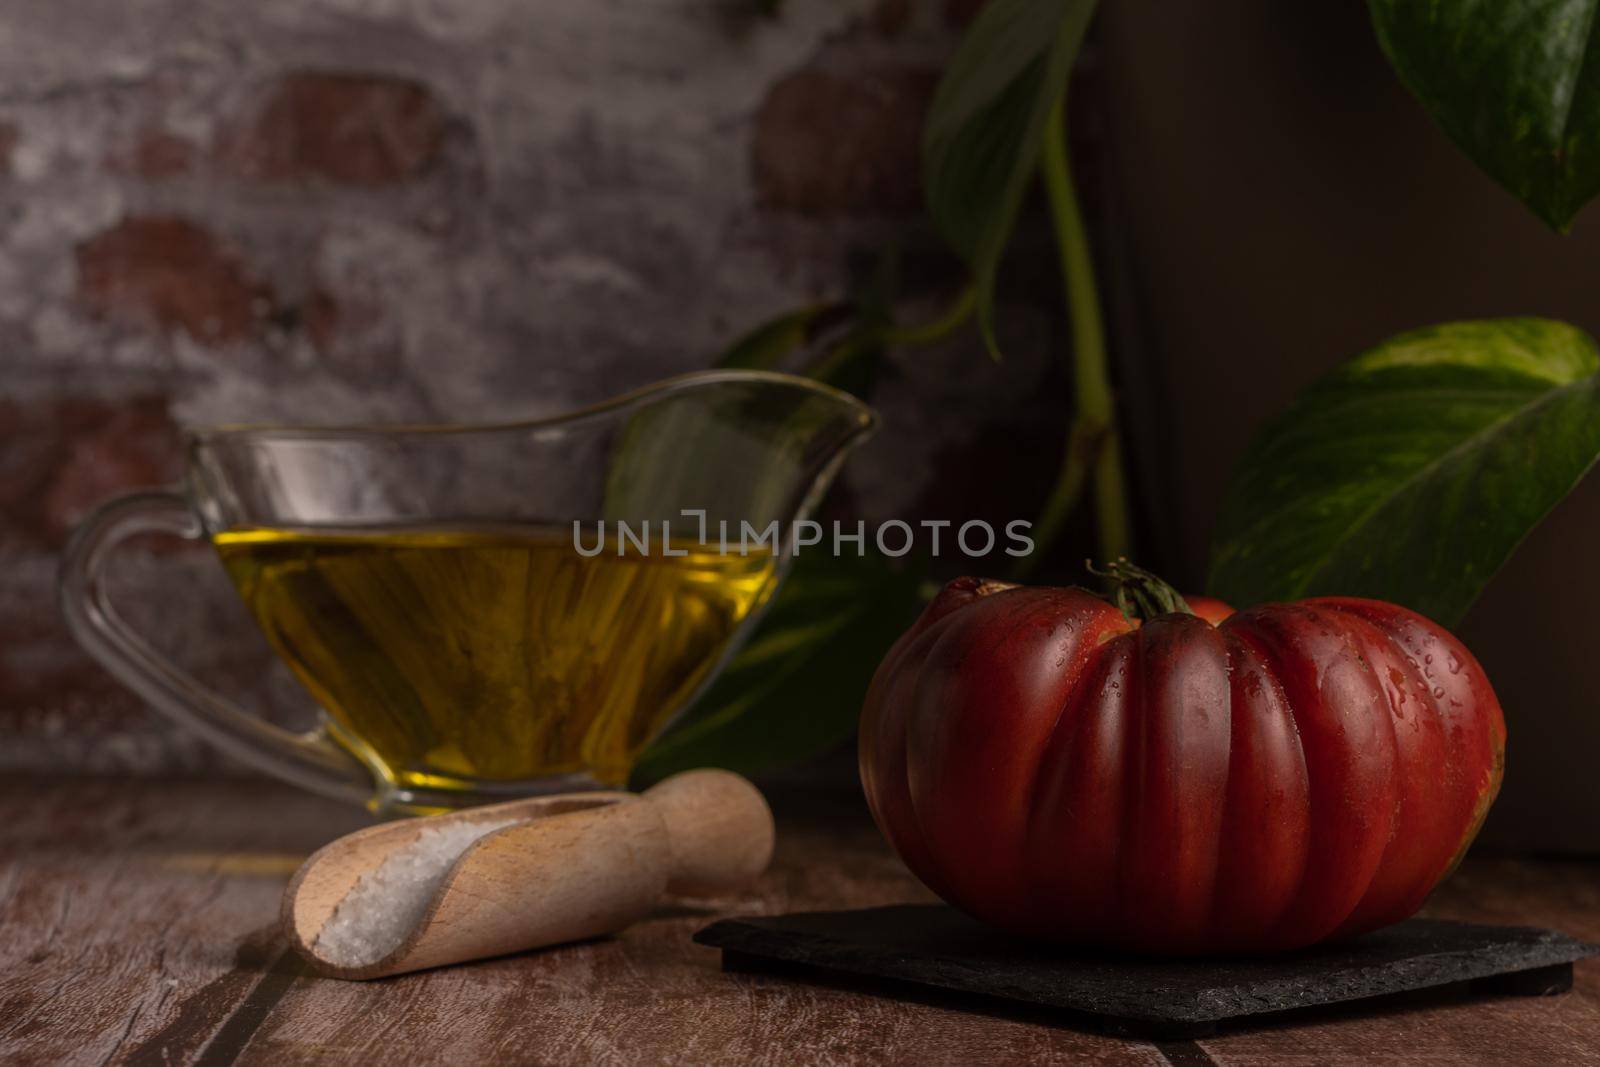 Agriculture and healthy eating, Moorish tomatoes from the garden with jar of oil and salt by joseantona